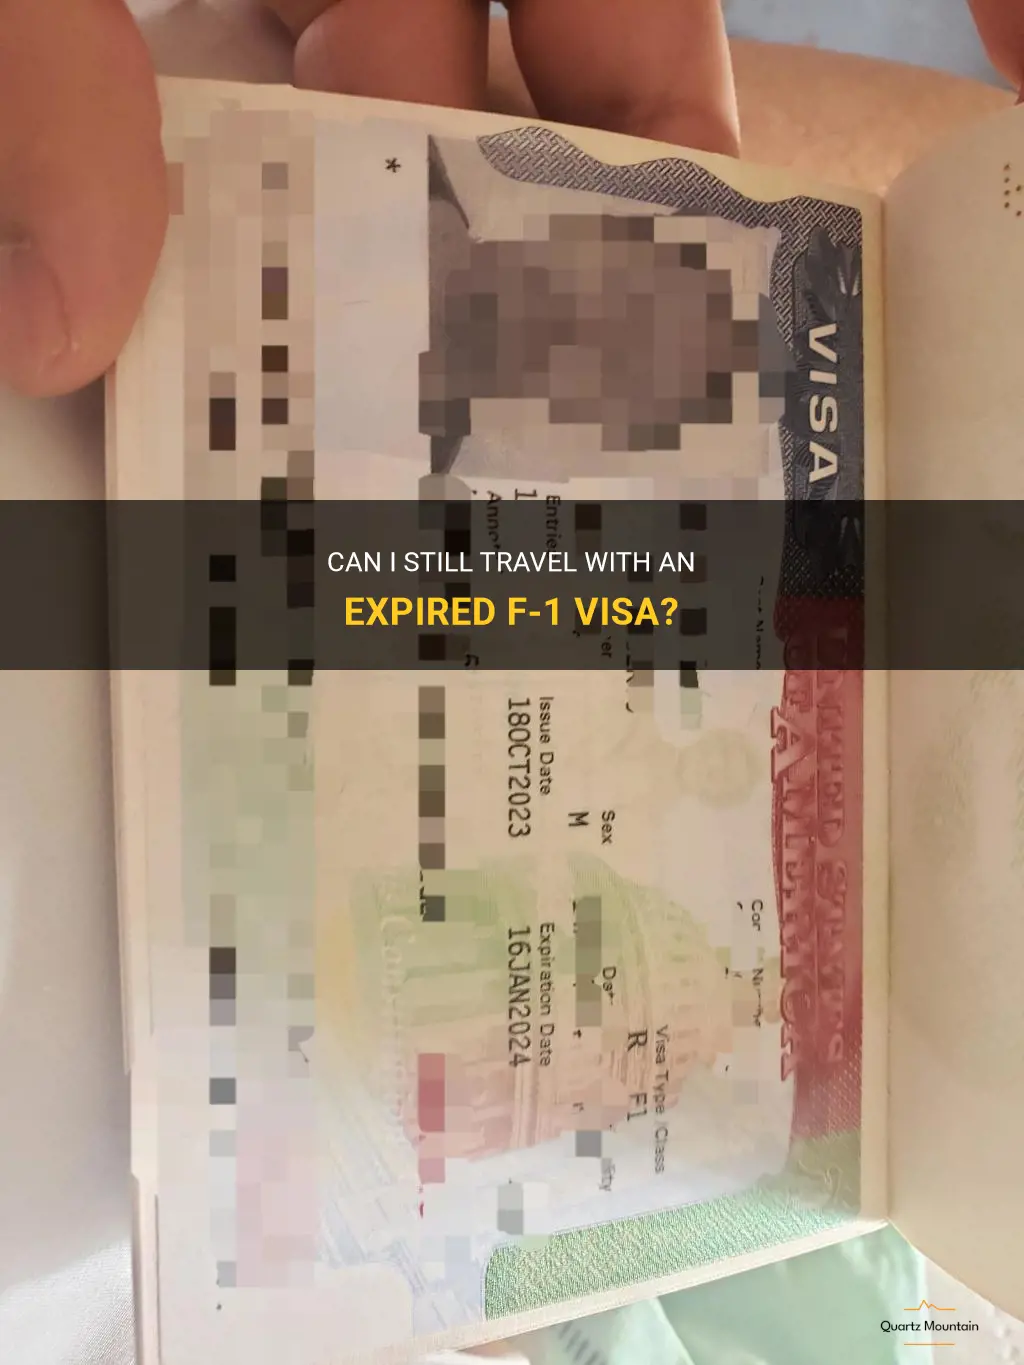 can i travel with an expired f-1 visa